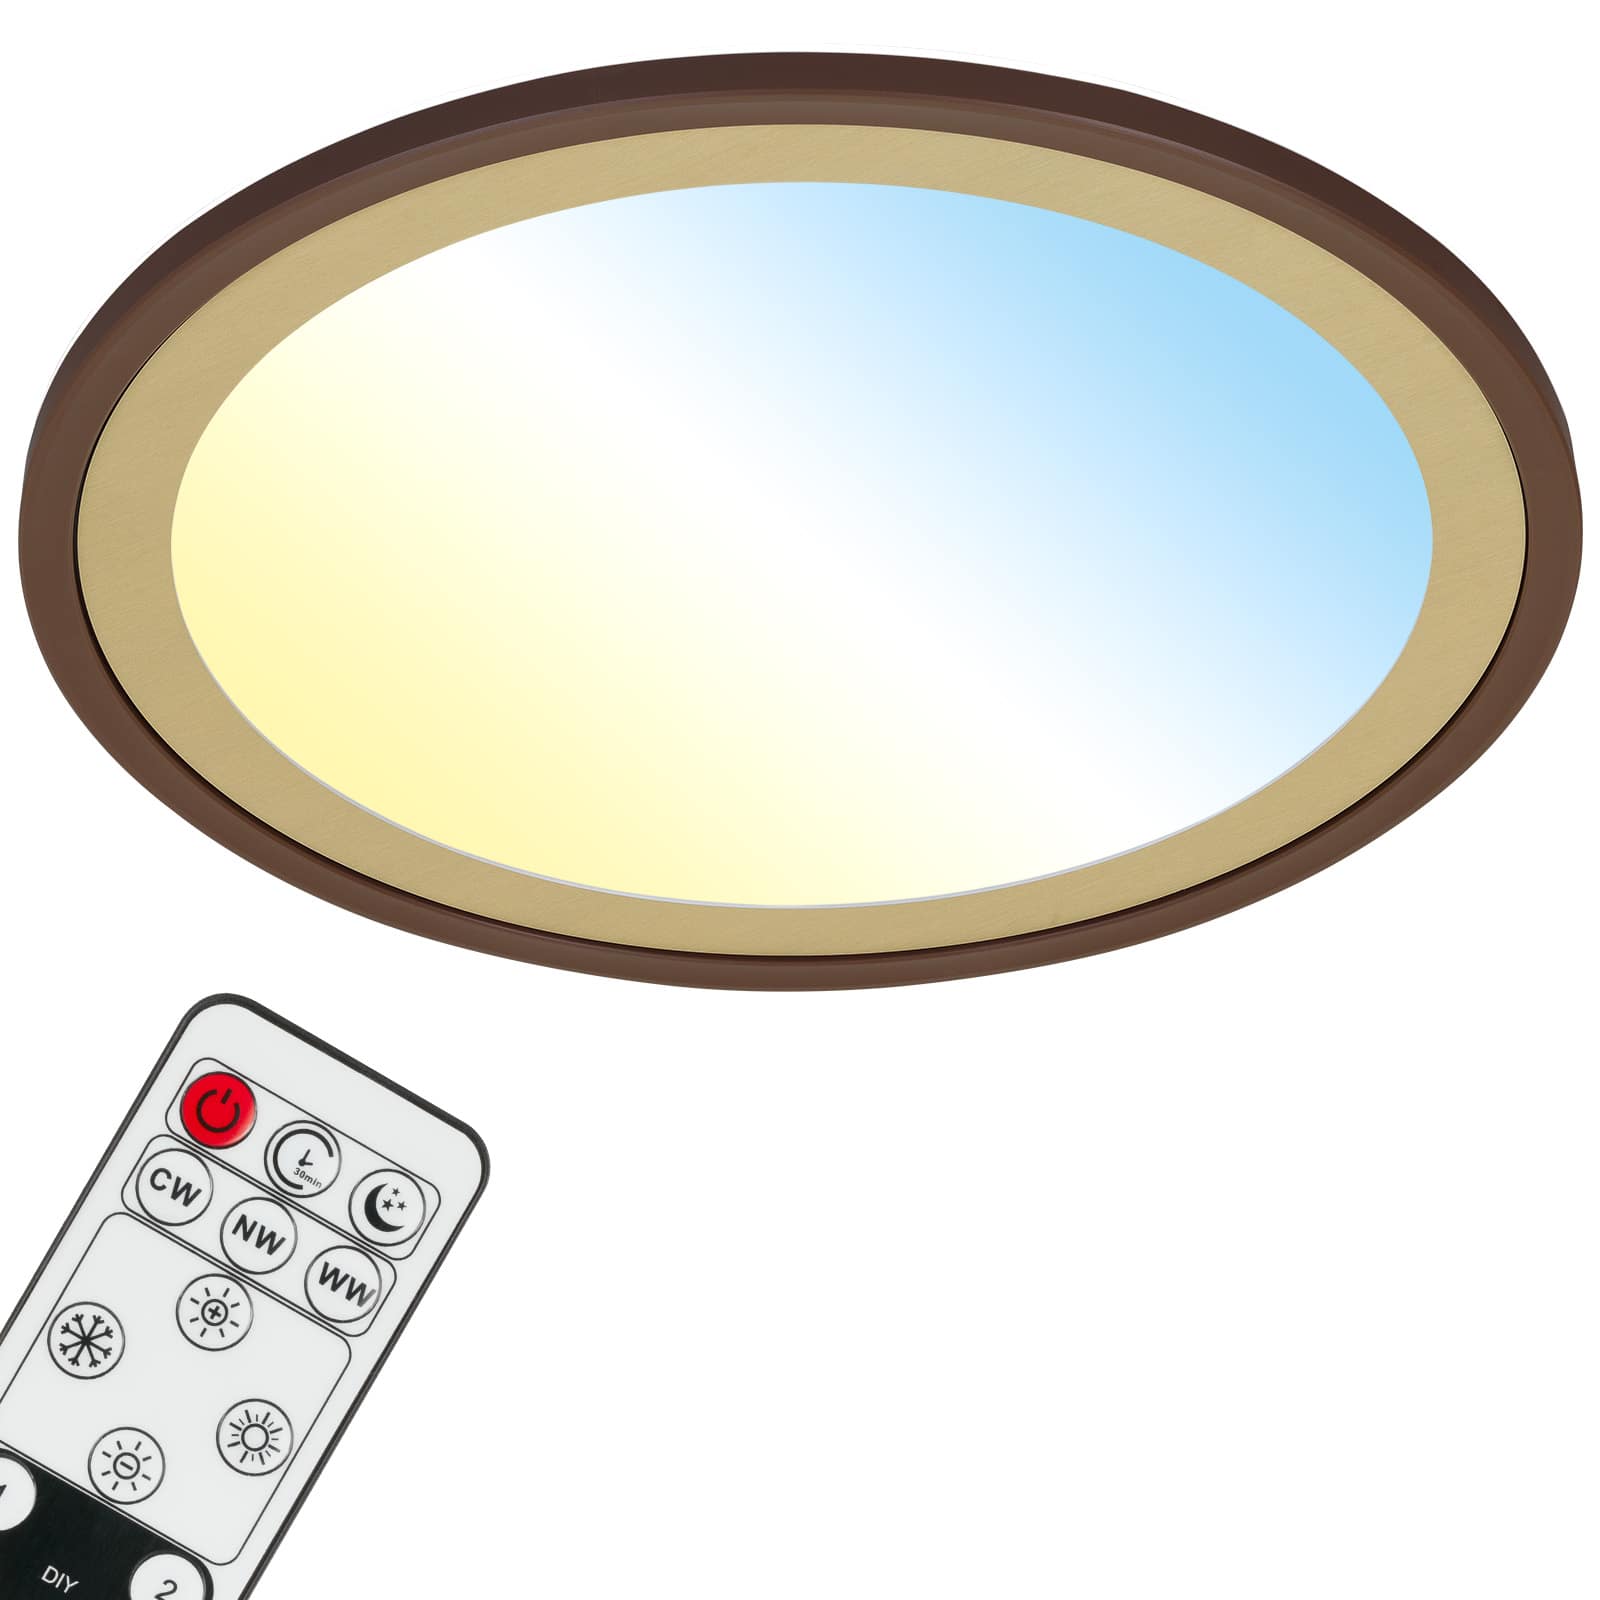 Ultraflaches CCT-LED panel with LED backlight, Ø42 cm, LED, 22 W, 3000 lm, brown-gold